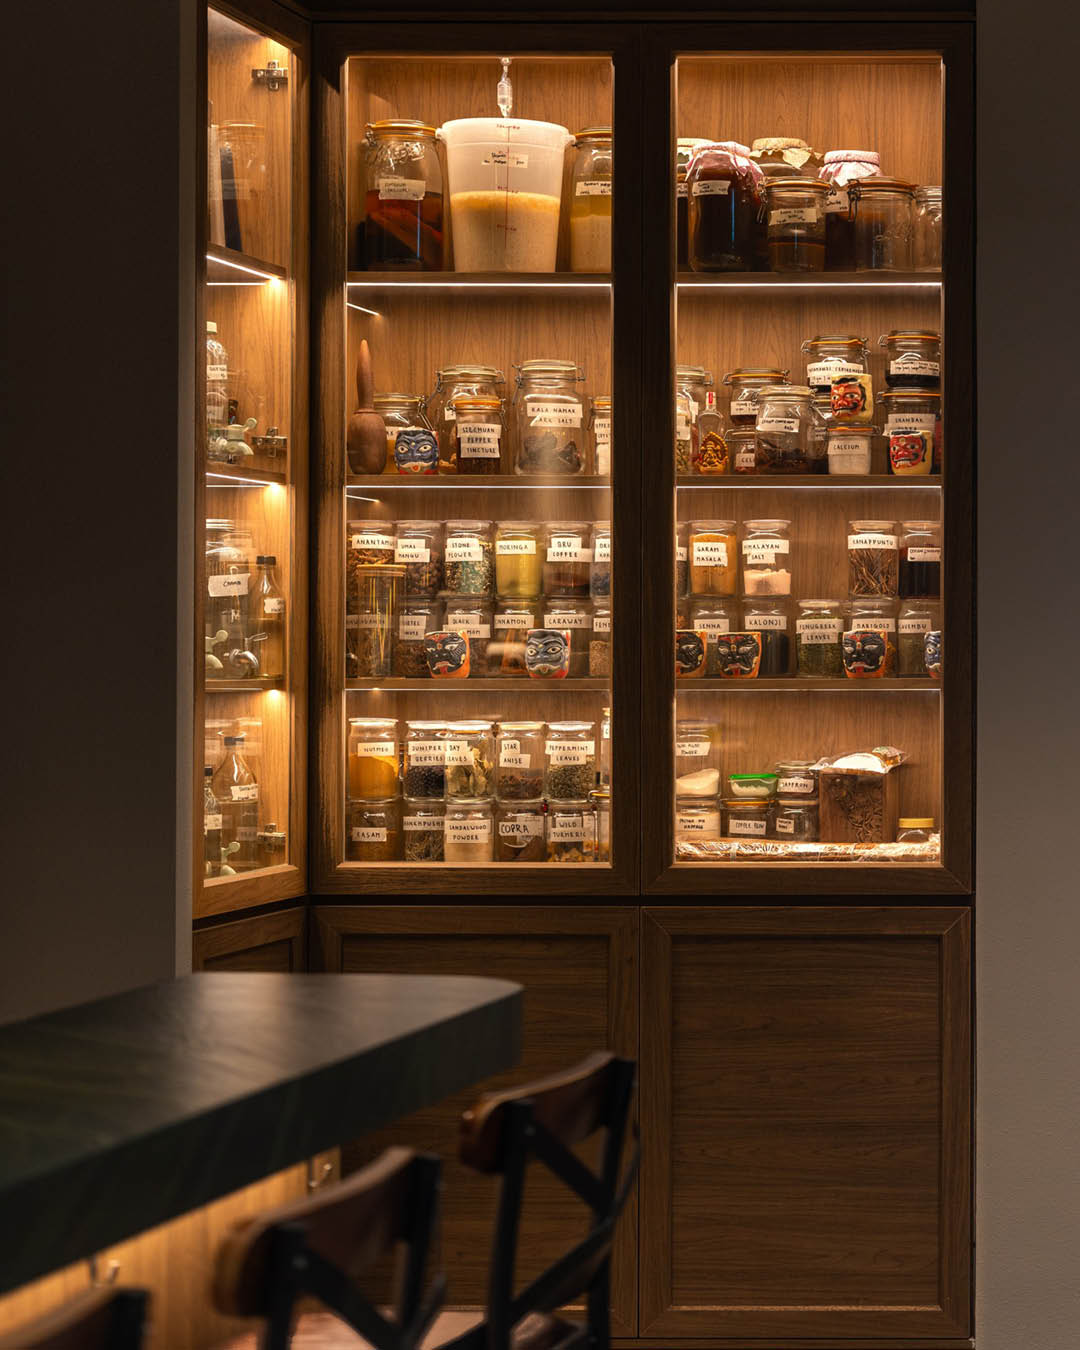 A cabinet filled with jars at The Elephant Room.